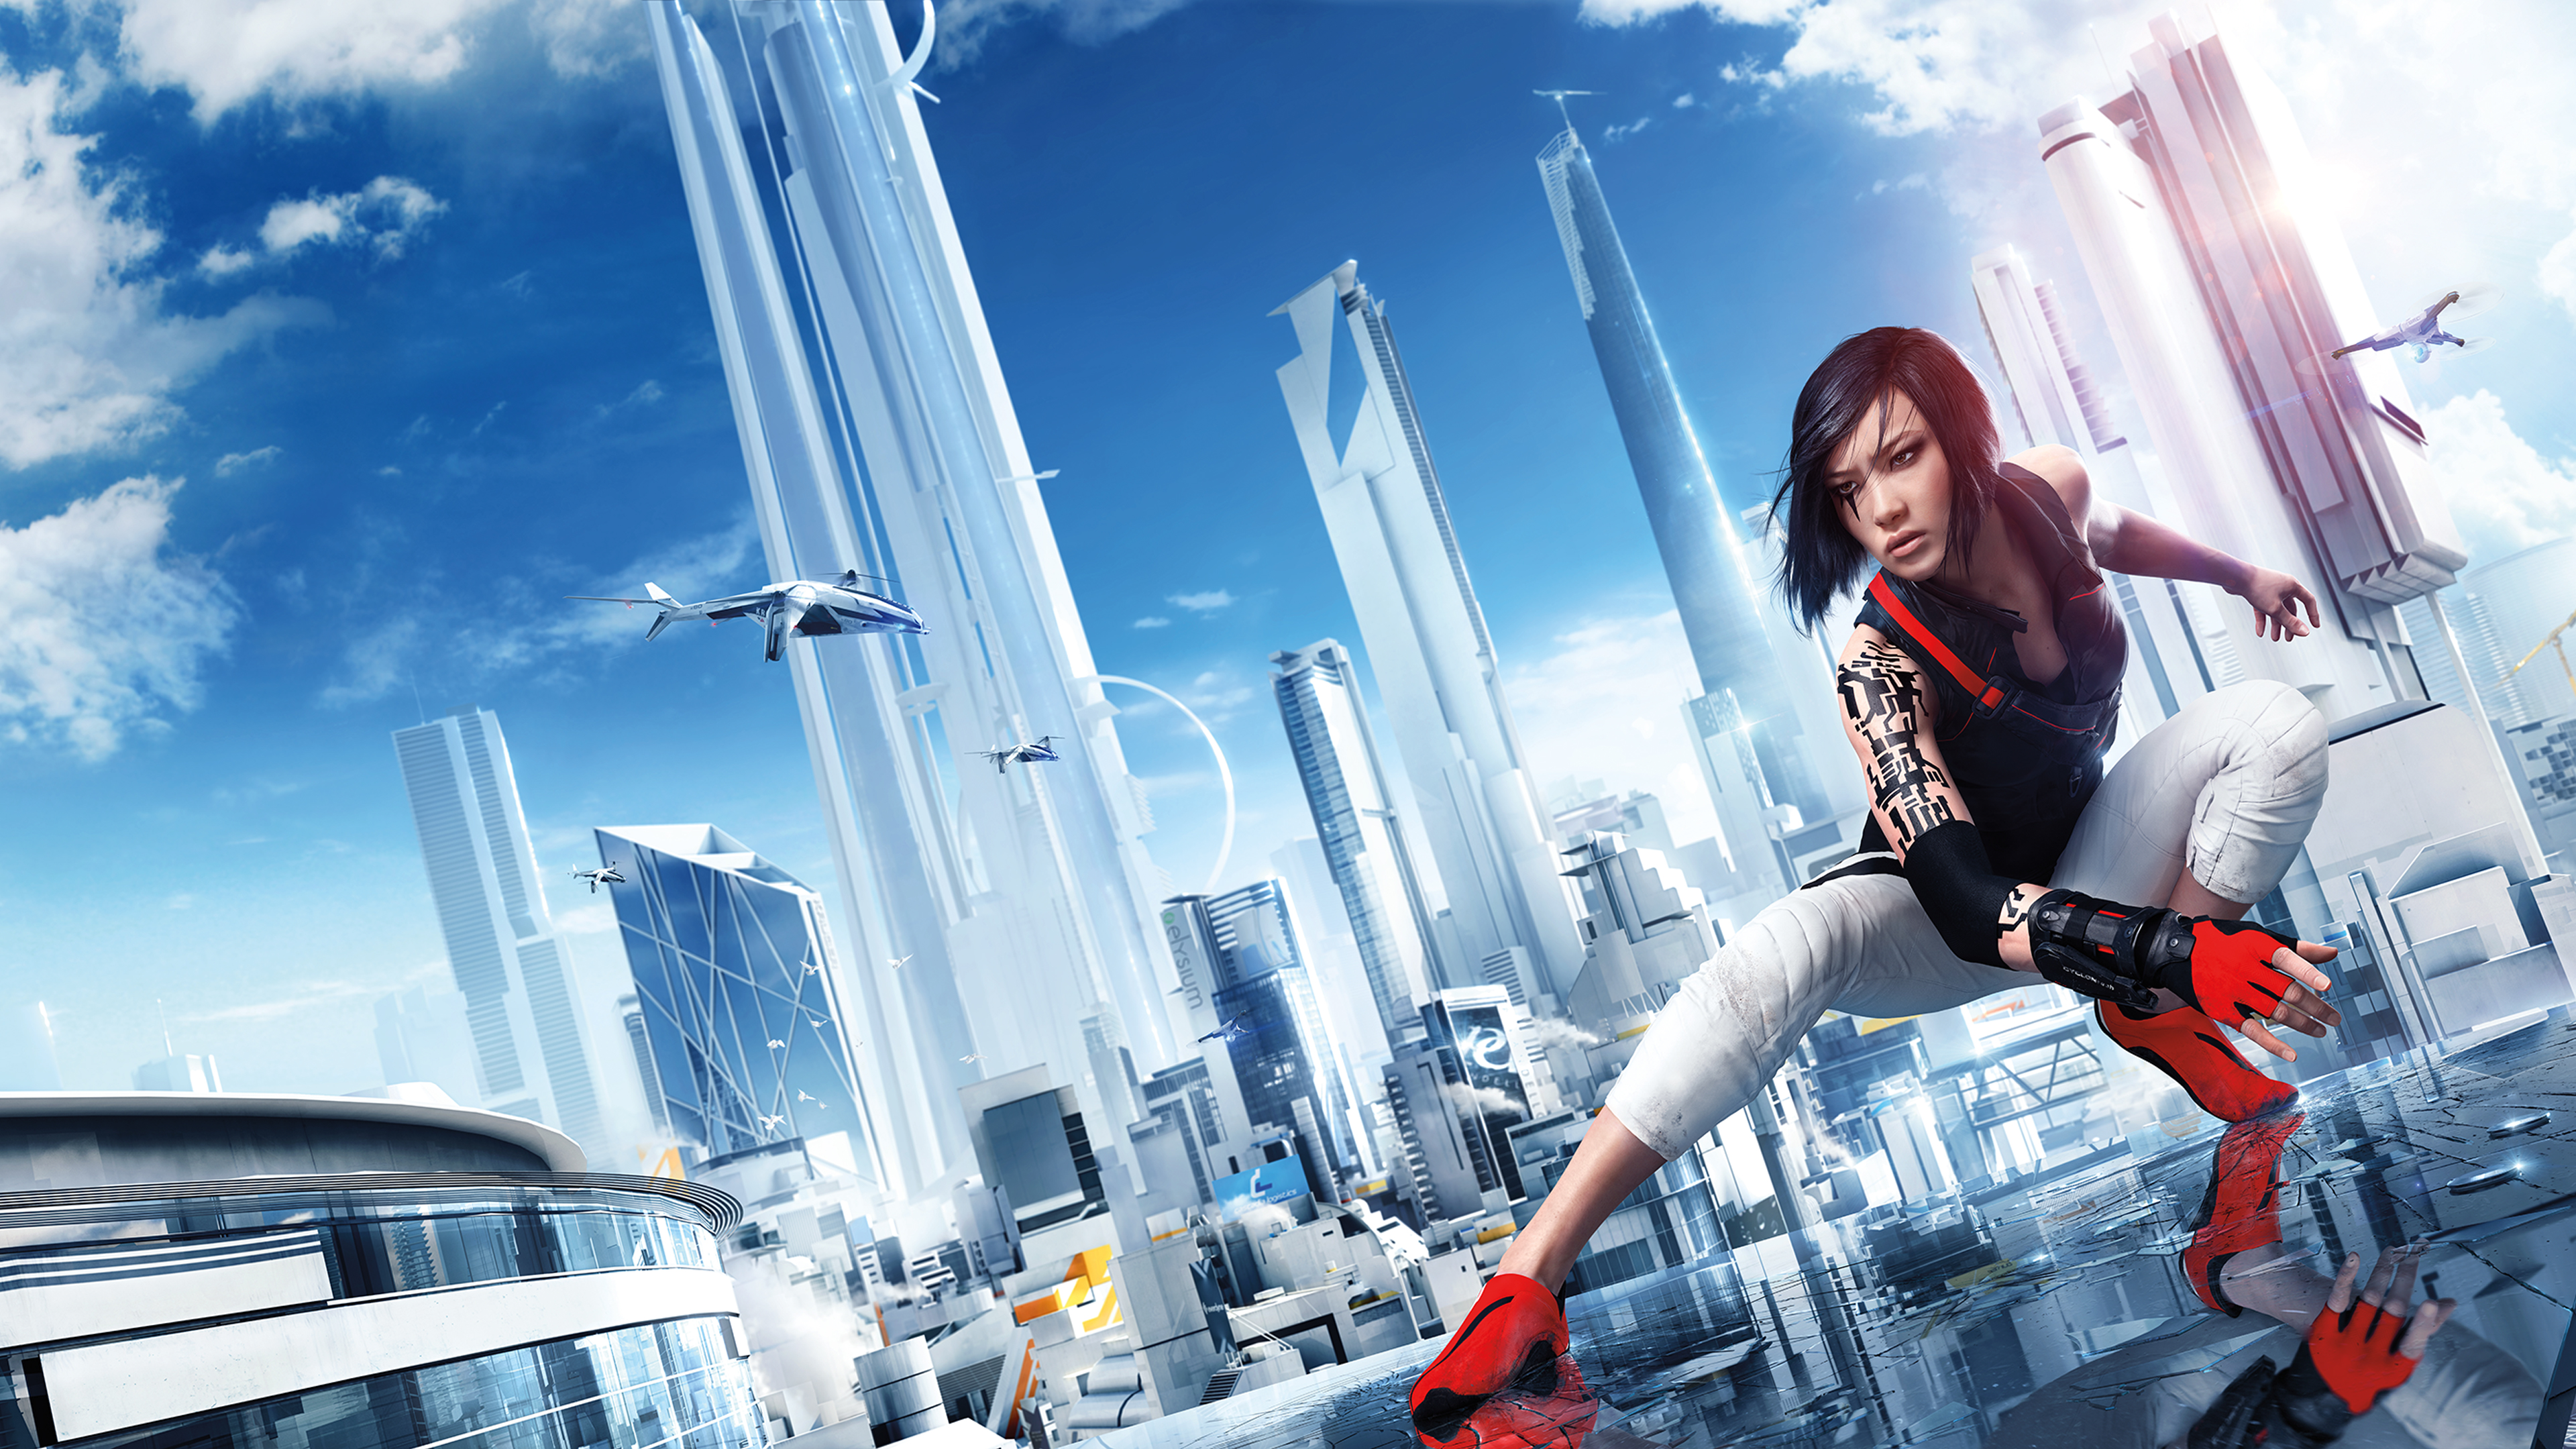 General 3840x2160 Mirror's Edge video game art sky clouds video games looking away reflection building city aircraft tattoo Electronic Arts